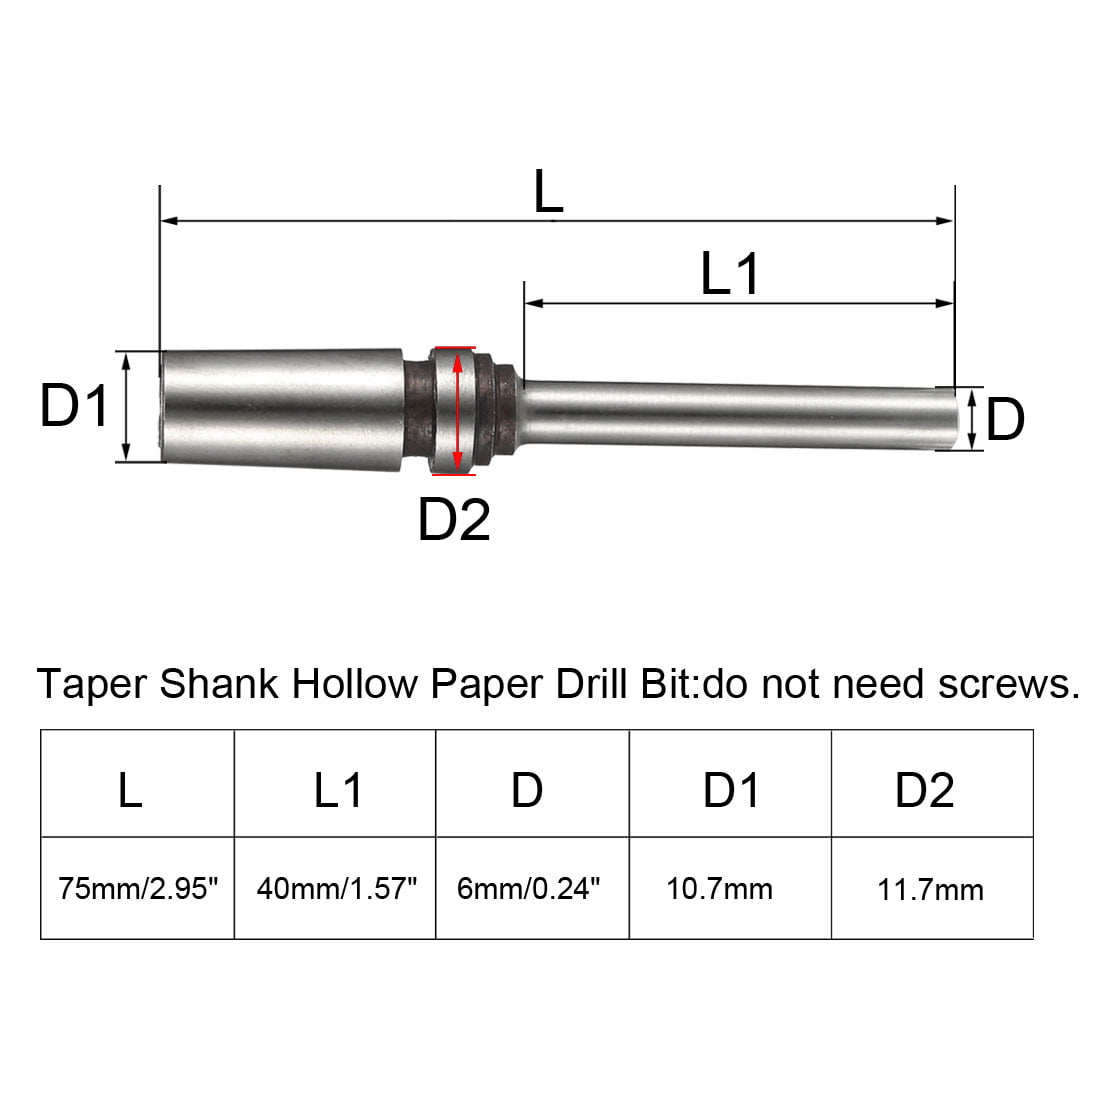 uxcell Hollow Paper Drill Bit 6mmx75mm for Taper Shank Punch Punching Machine 